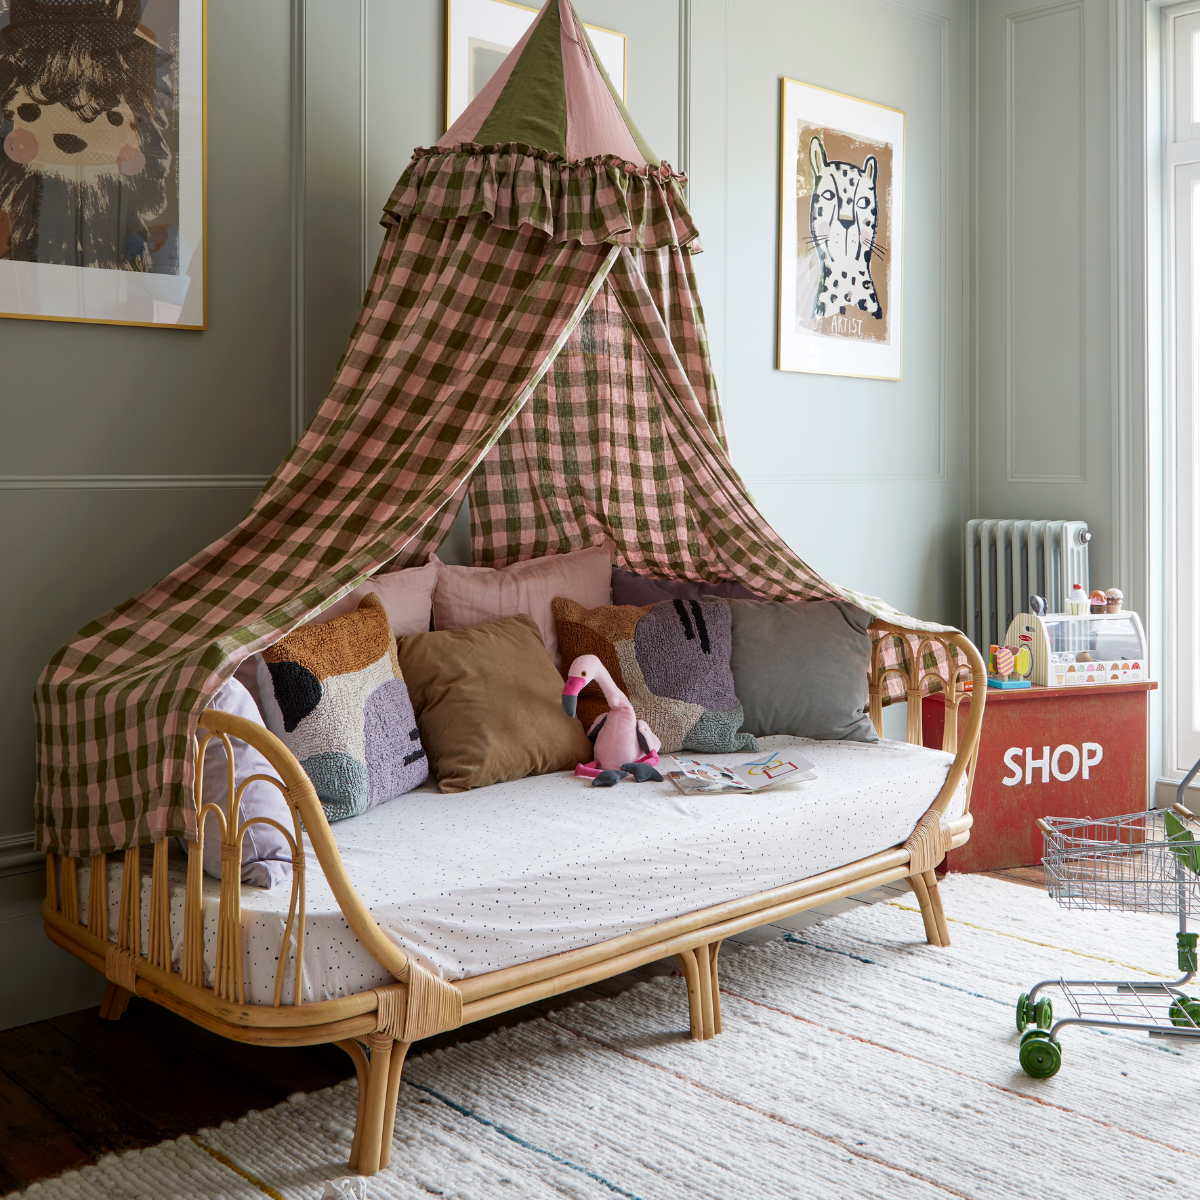 A day bed with a pink and green canopy hanging above.